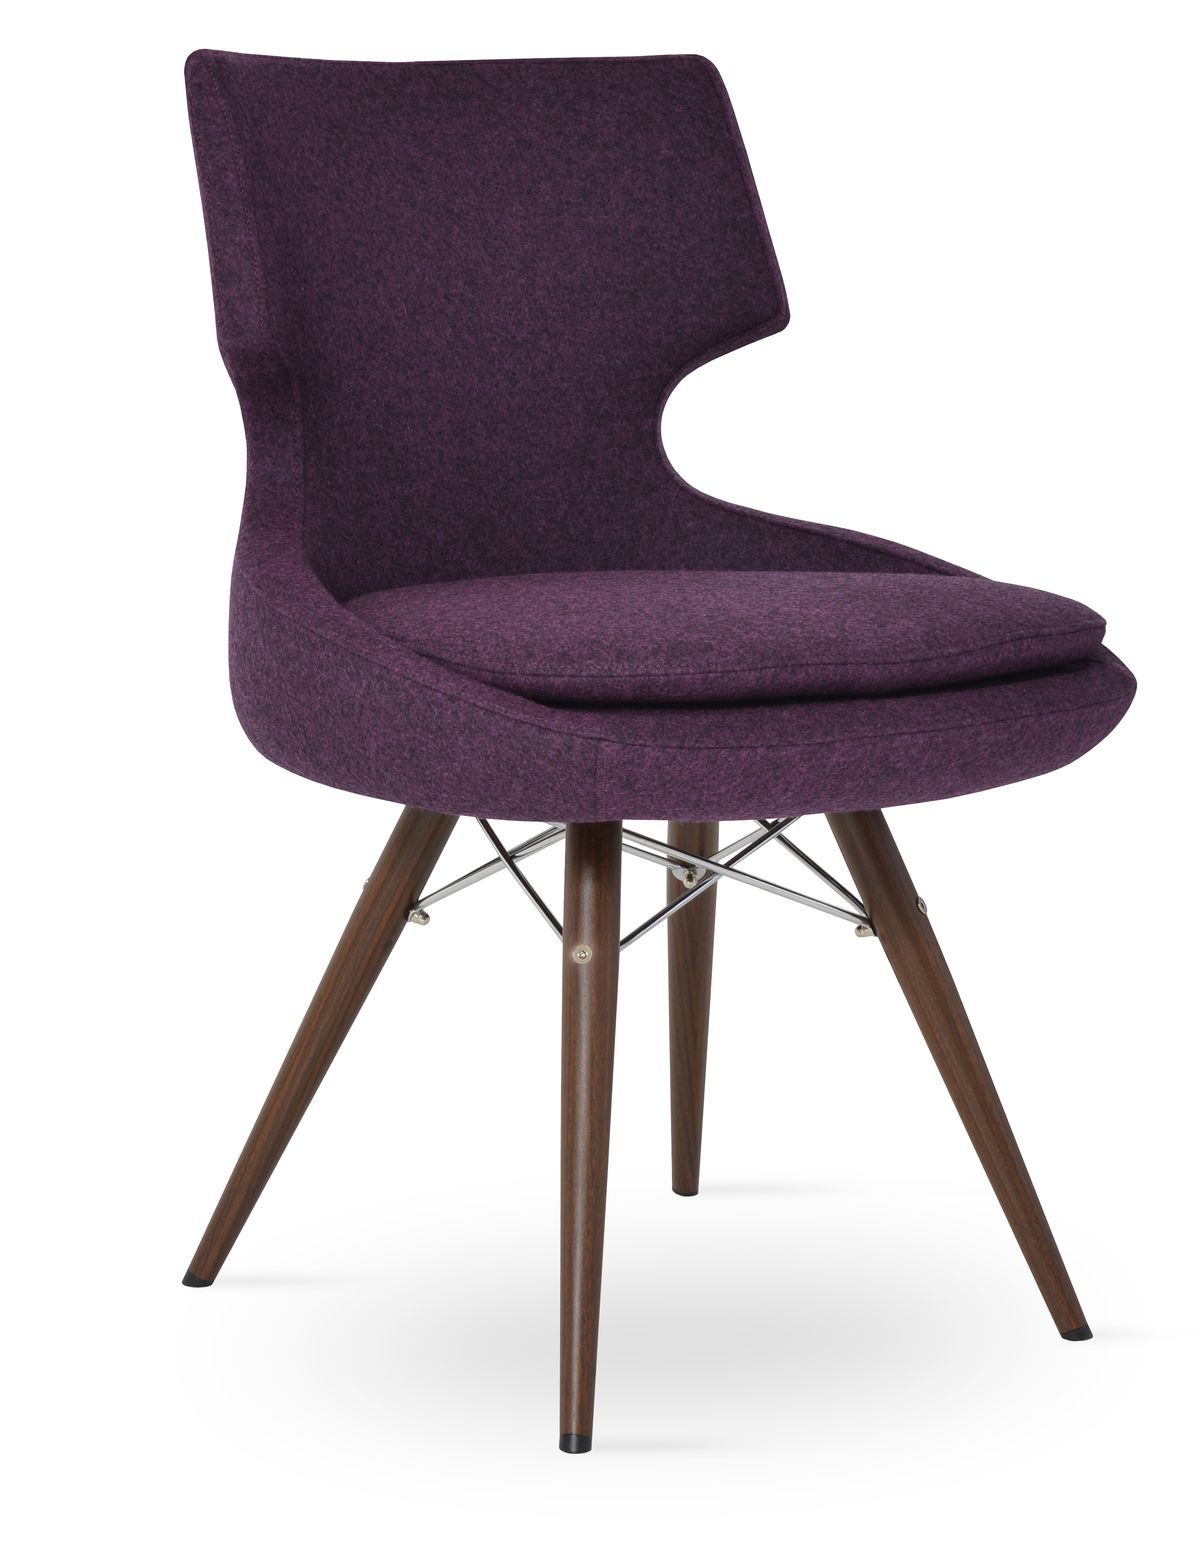 sohoConcept Patara MW Chair Fabric in Stainless Steel